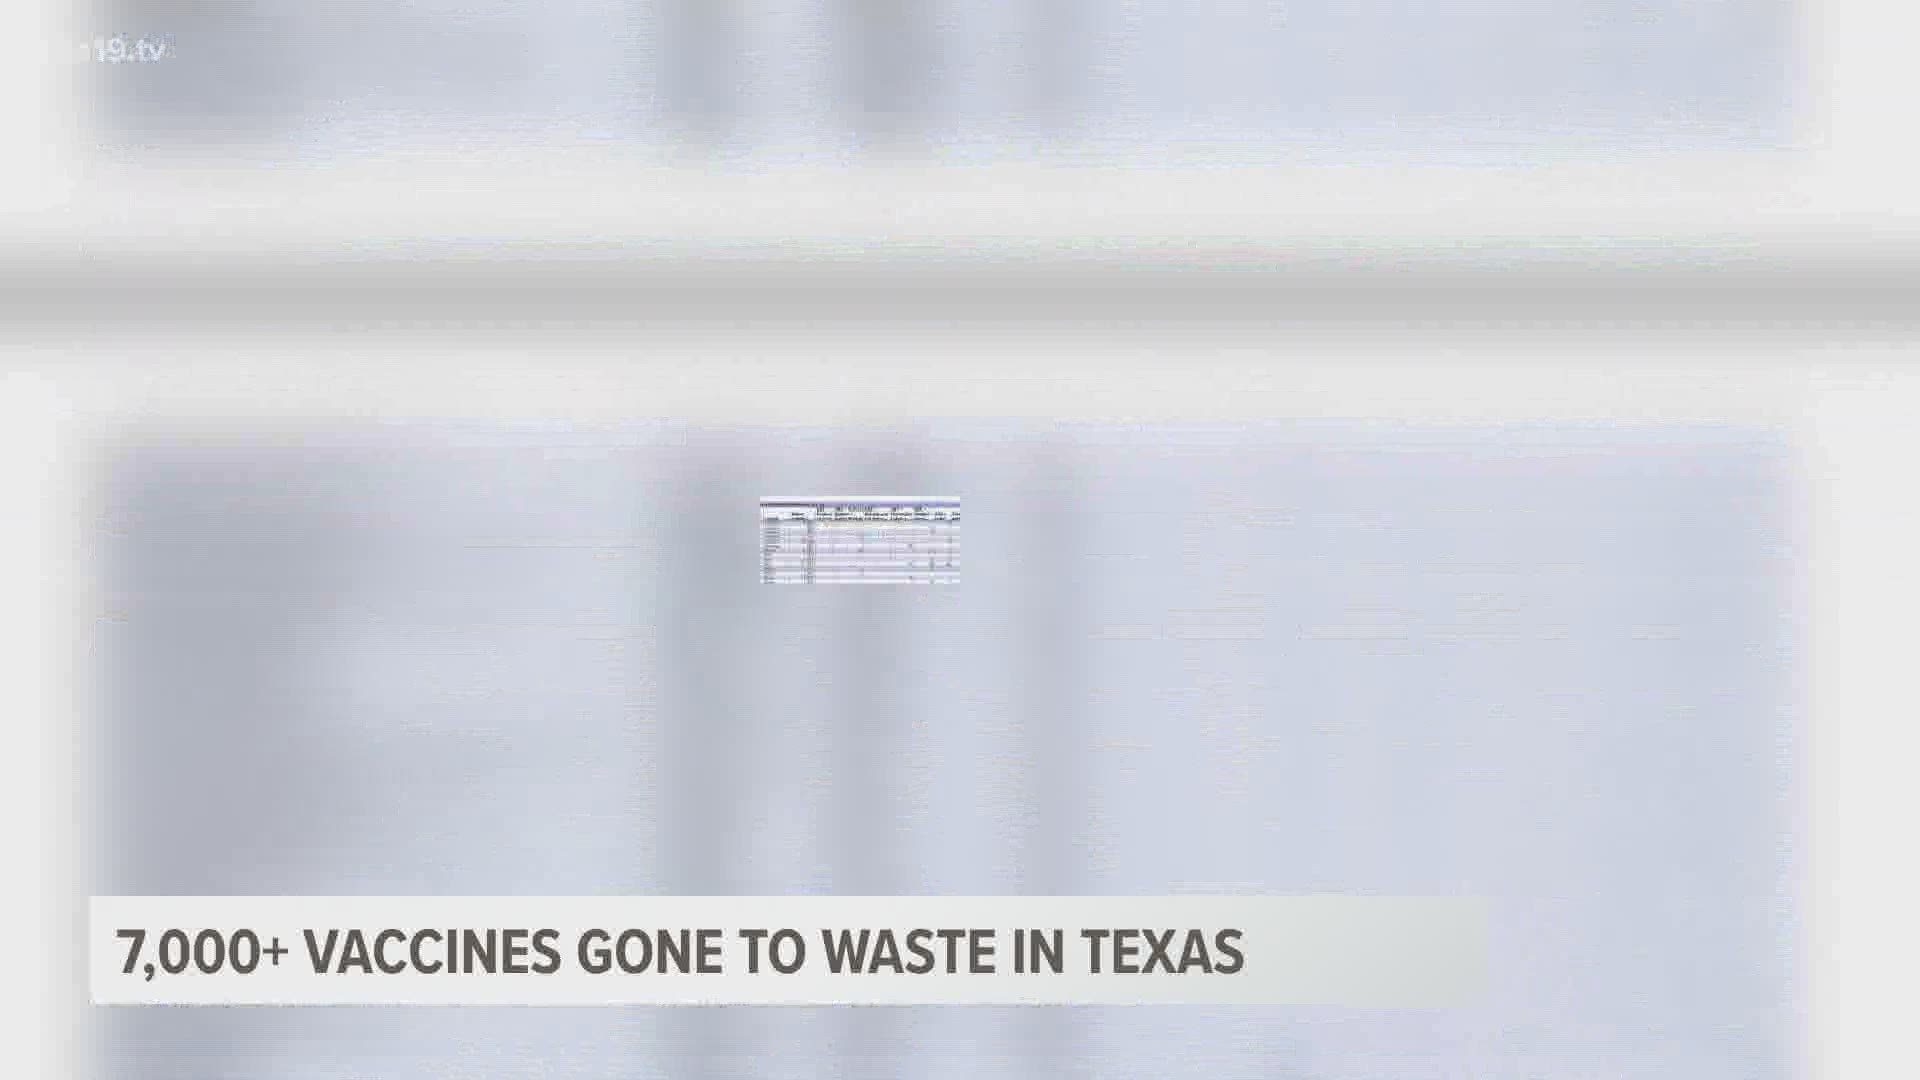 As millions are patiently waiting for the COVID-19 vaccine, thousands of doses are being tossed in the trash.